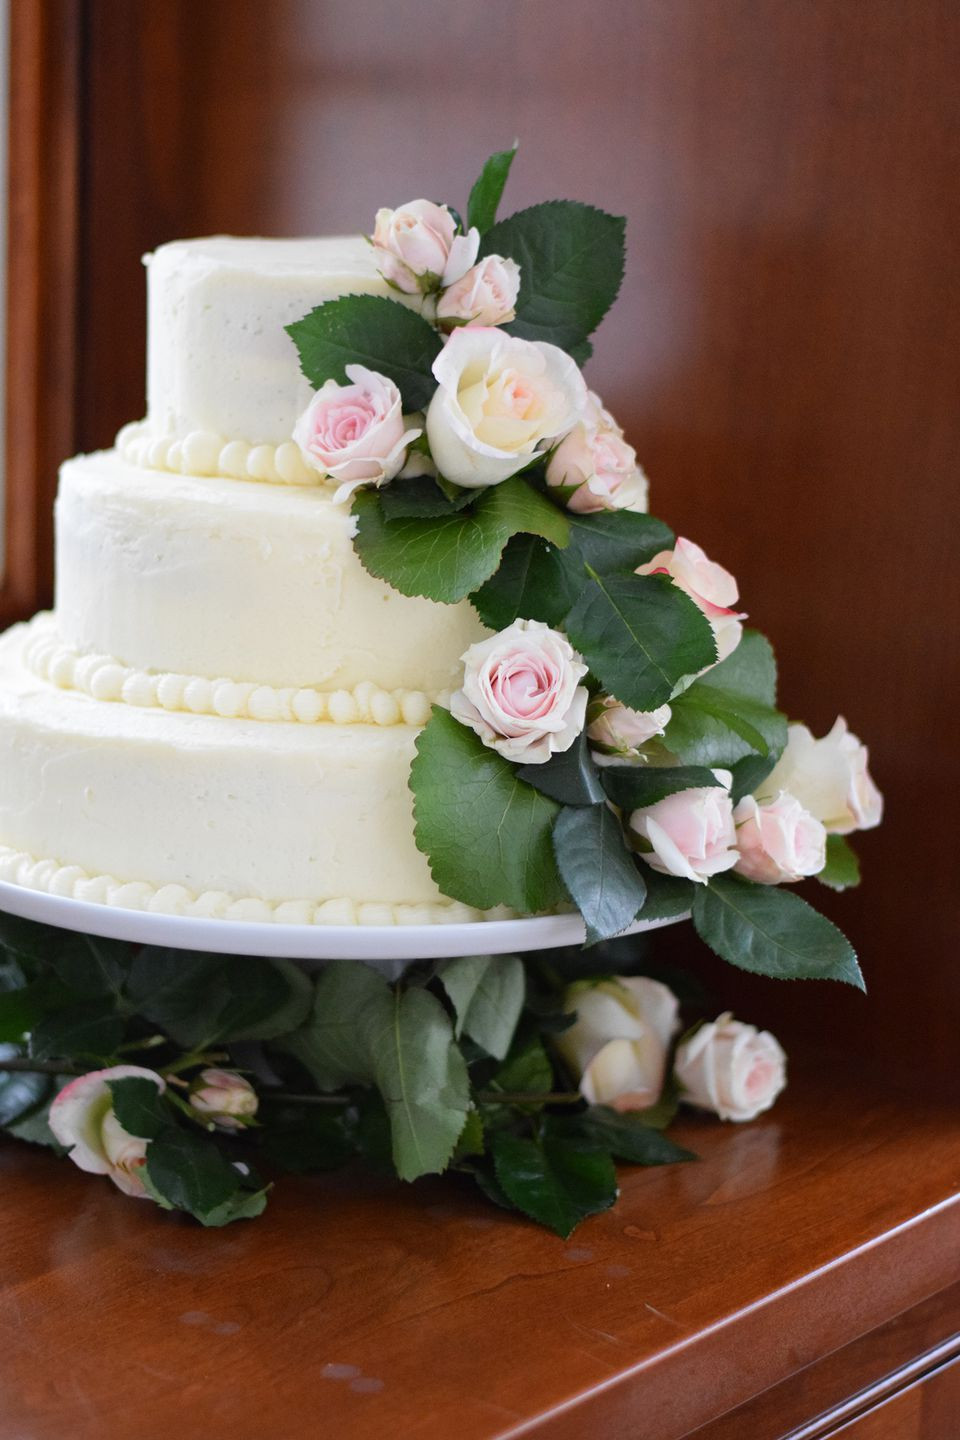 How To Decorate Wedding Cakes
 How to Bake and Decorate a 3 Tier Wedding Cake